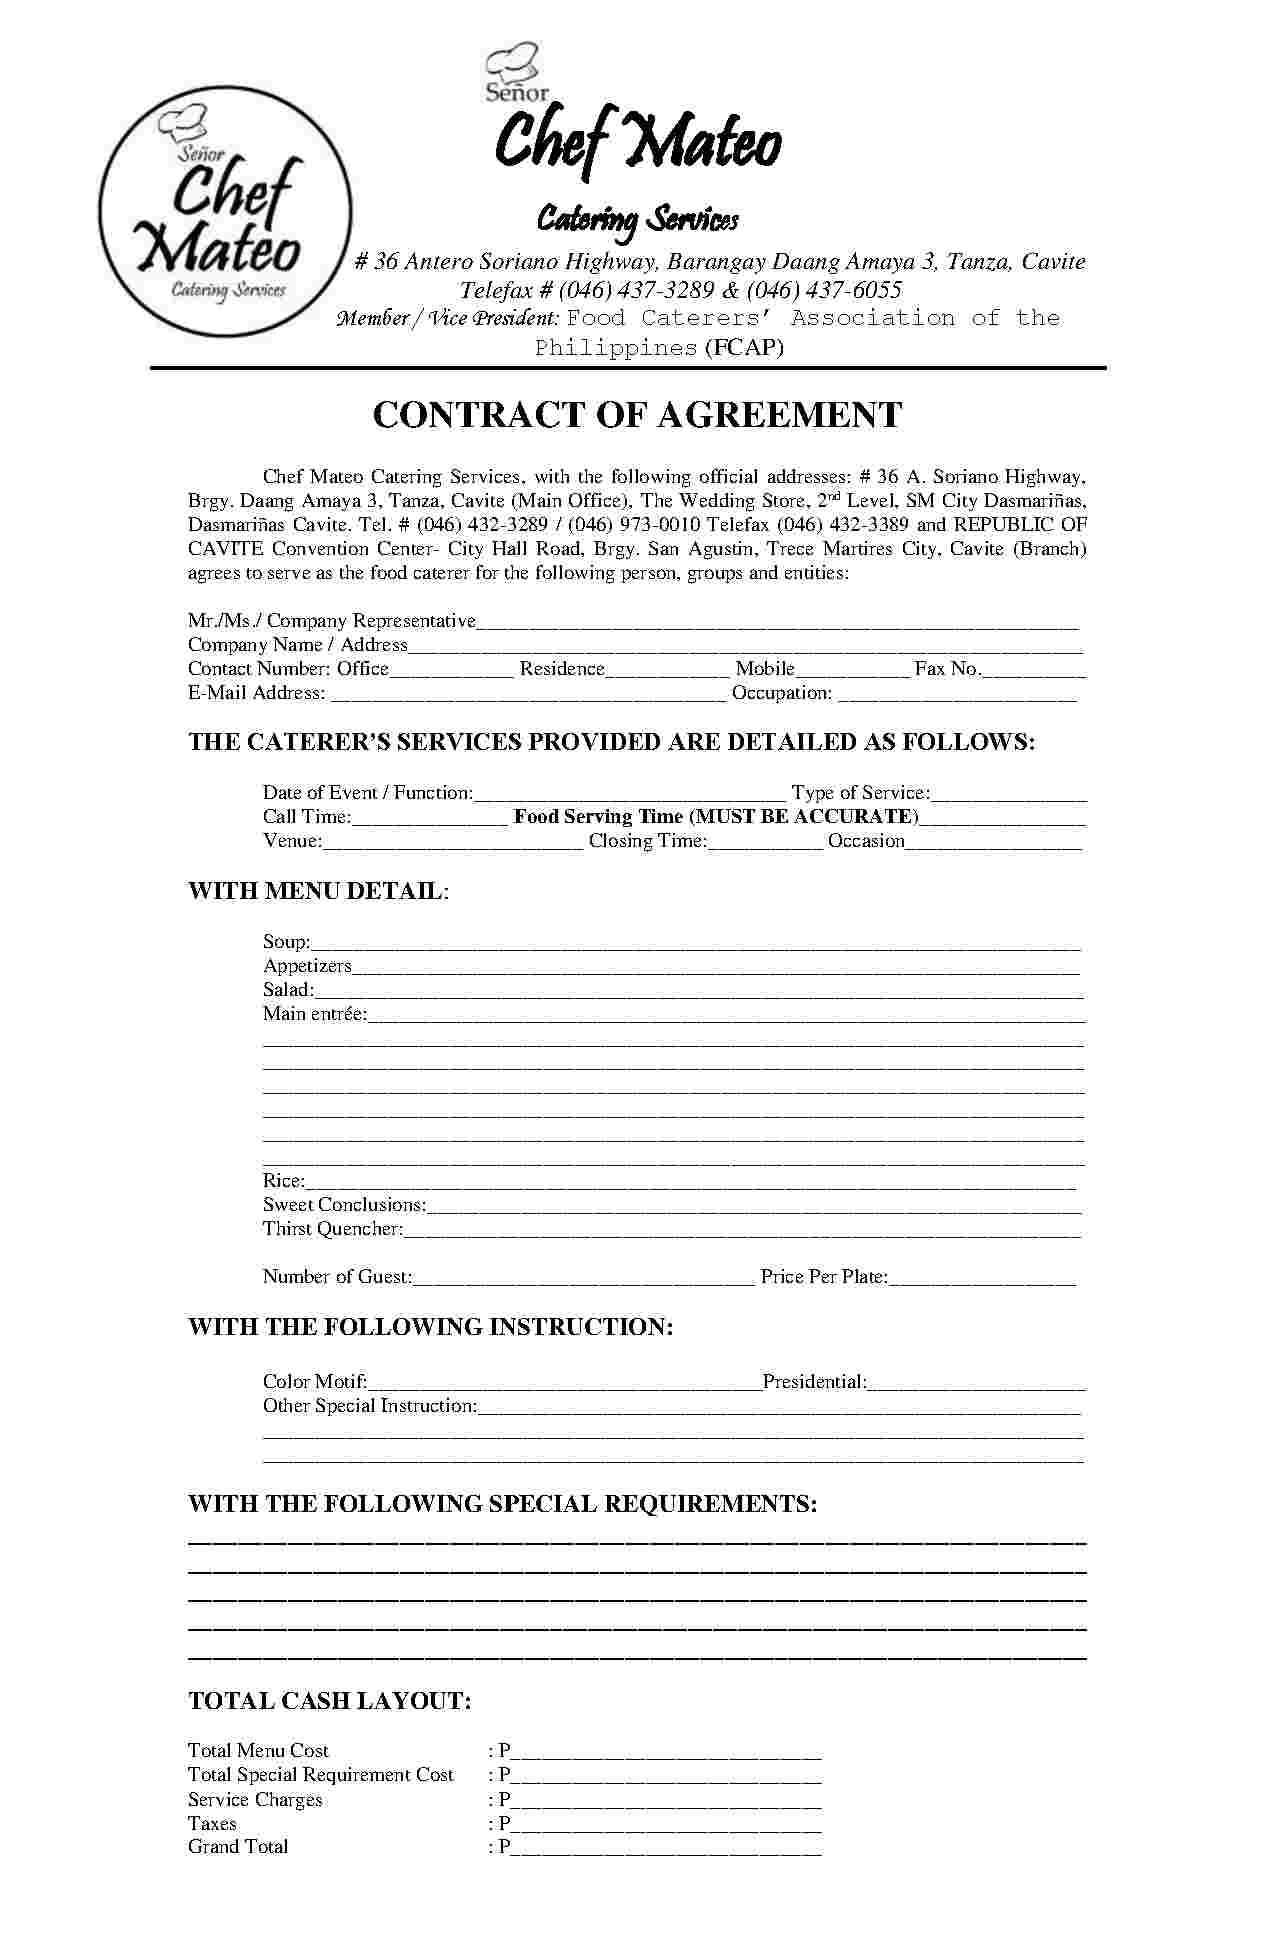 Download Catering Contract Style 5 Template For Free At Within Catering Contract Template Word